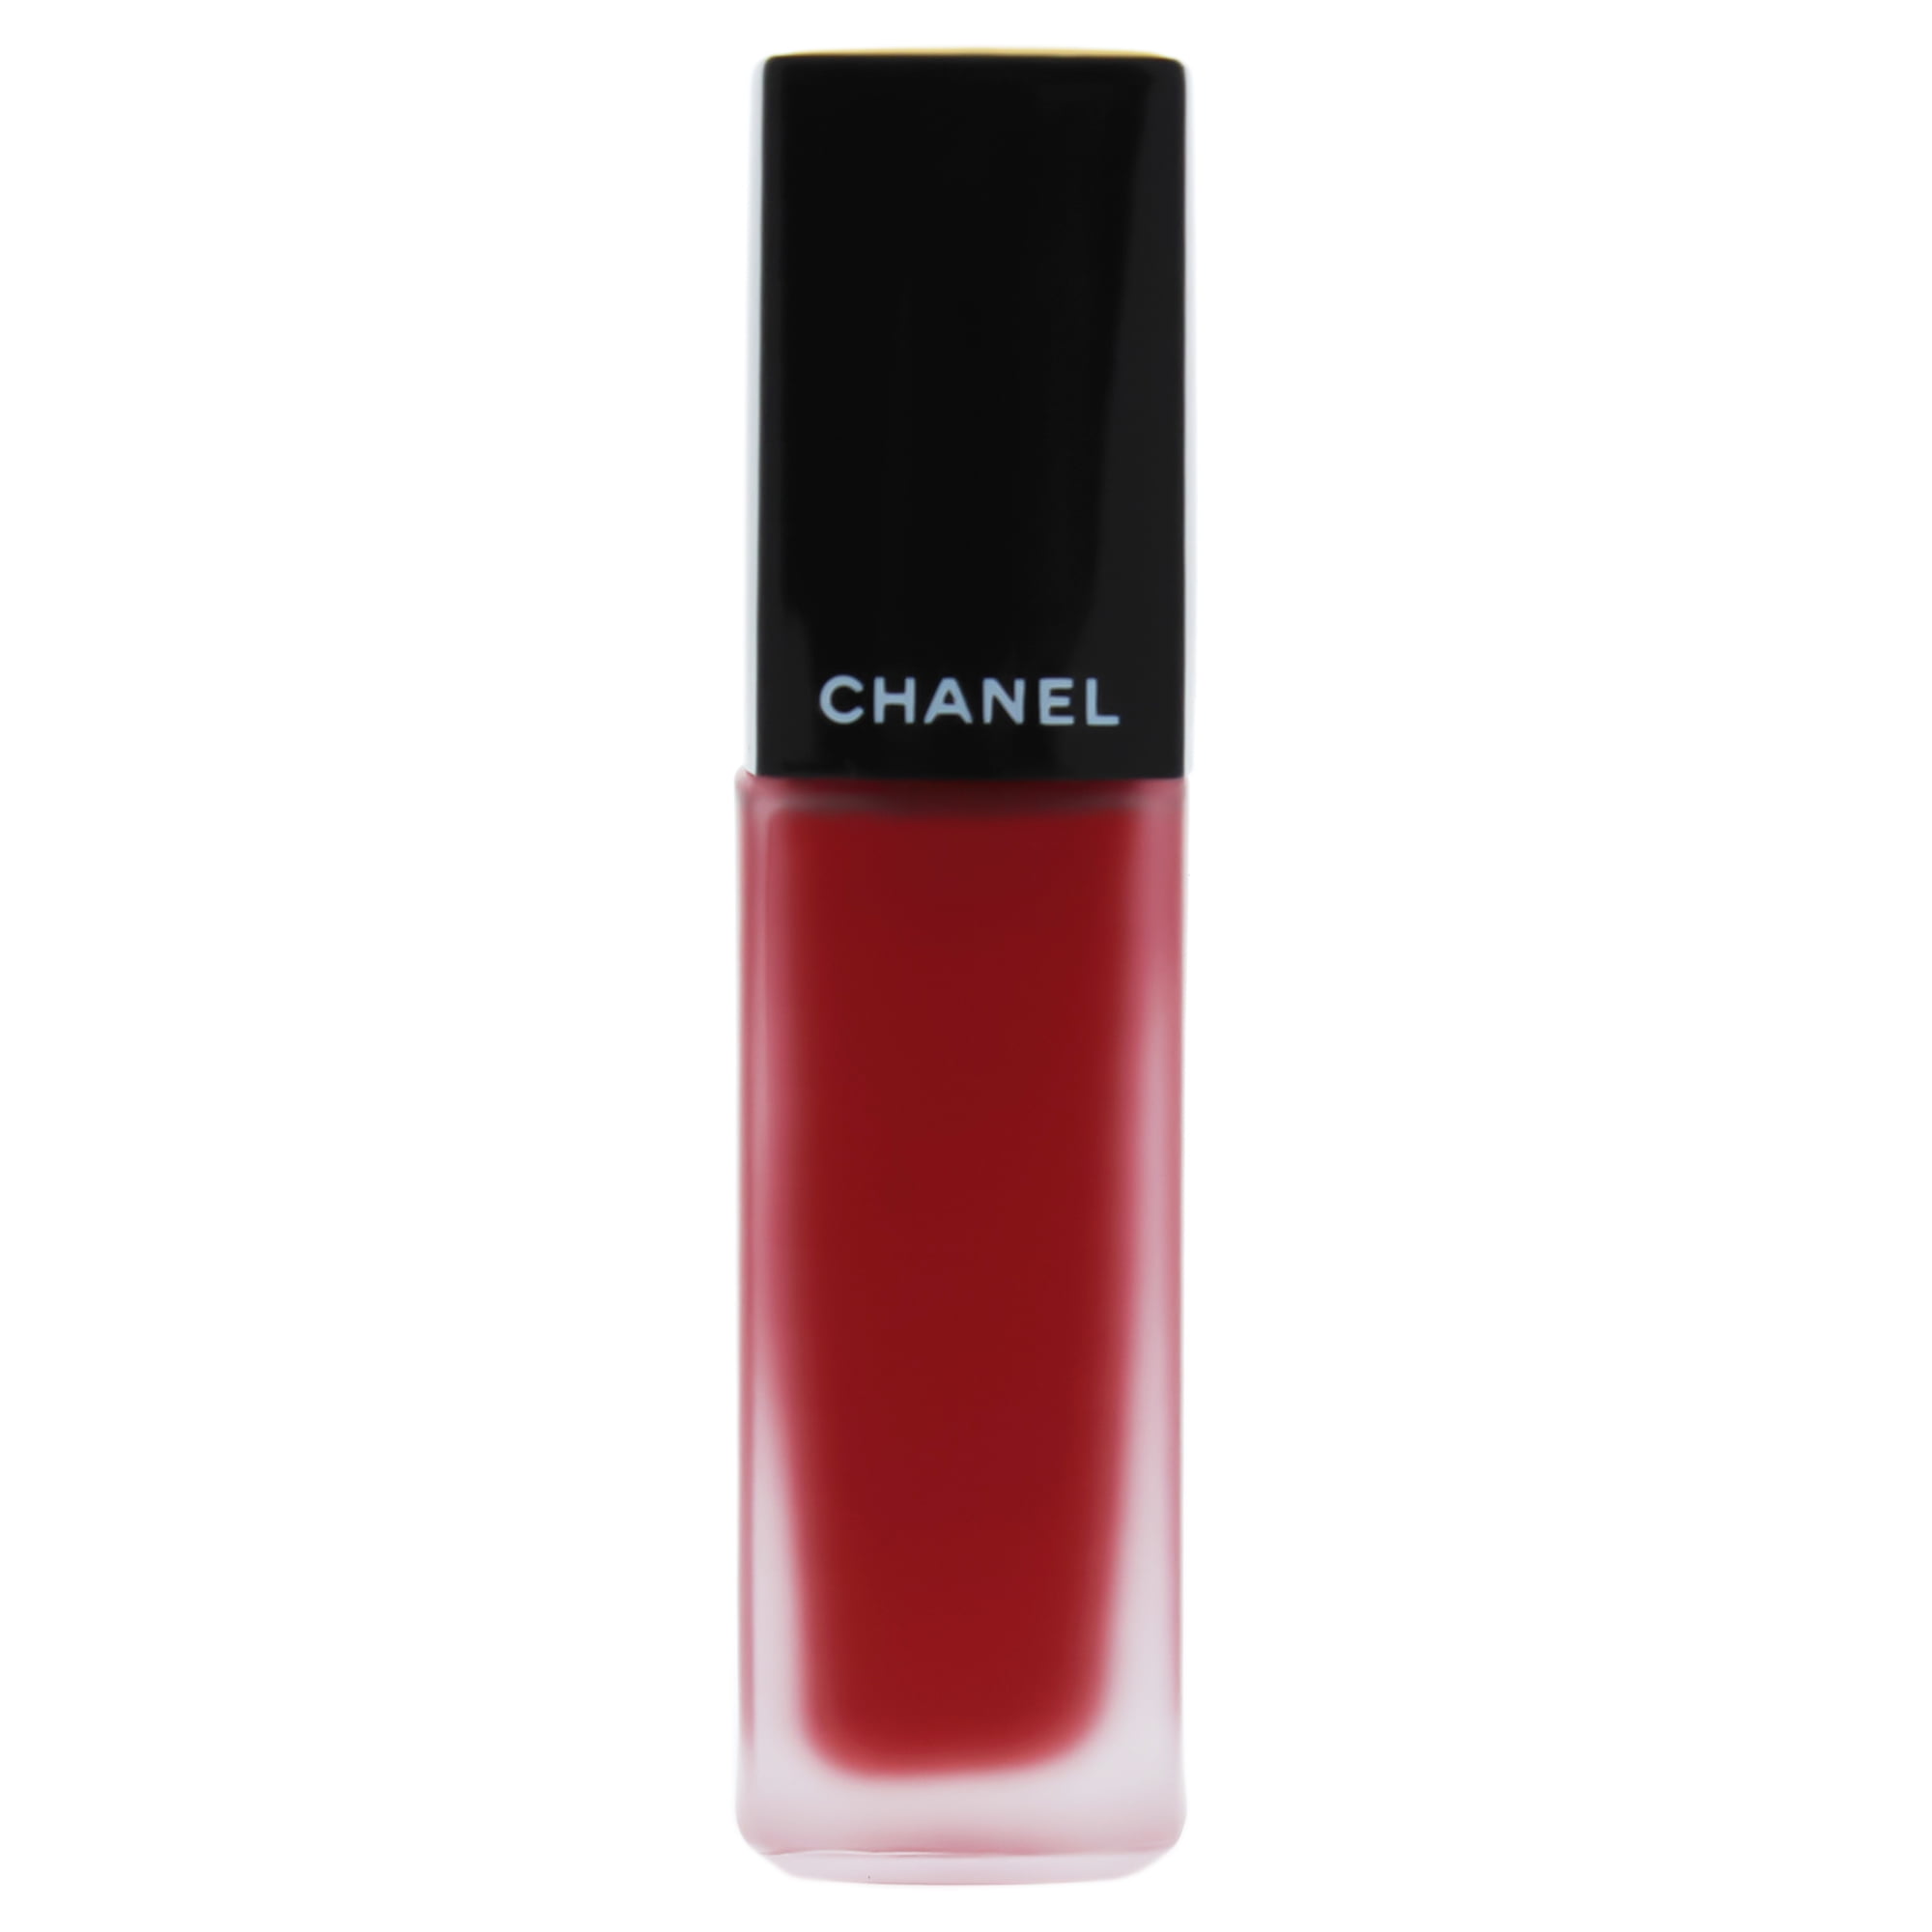 Rouge Allure Ink - 162 Energique by Chanel for Women - 0.12 oz